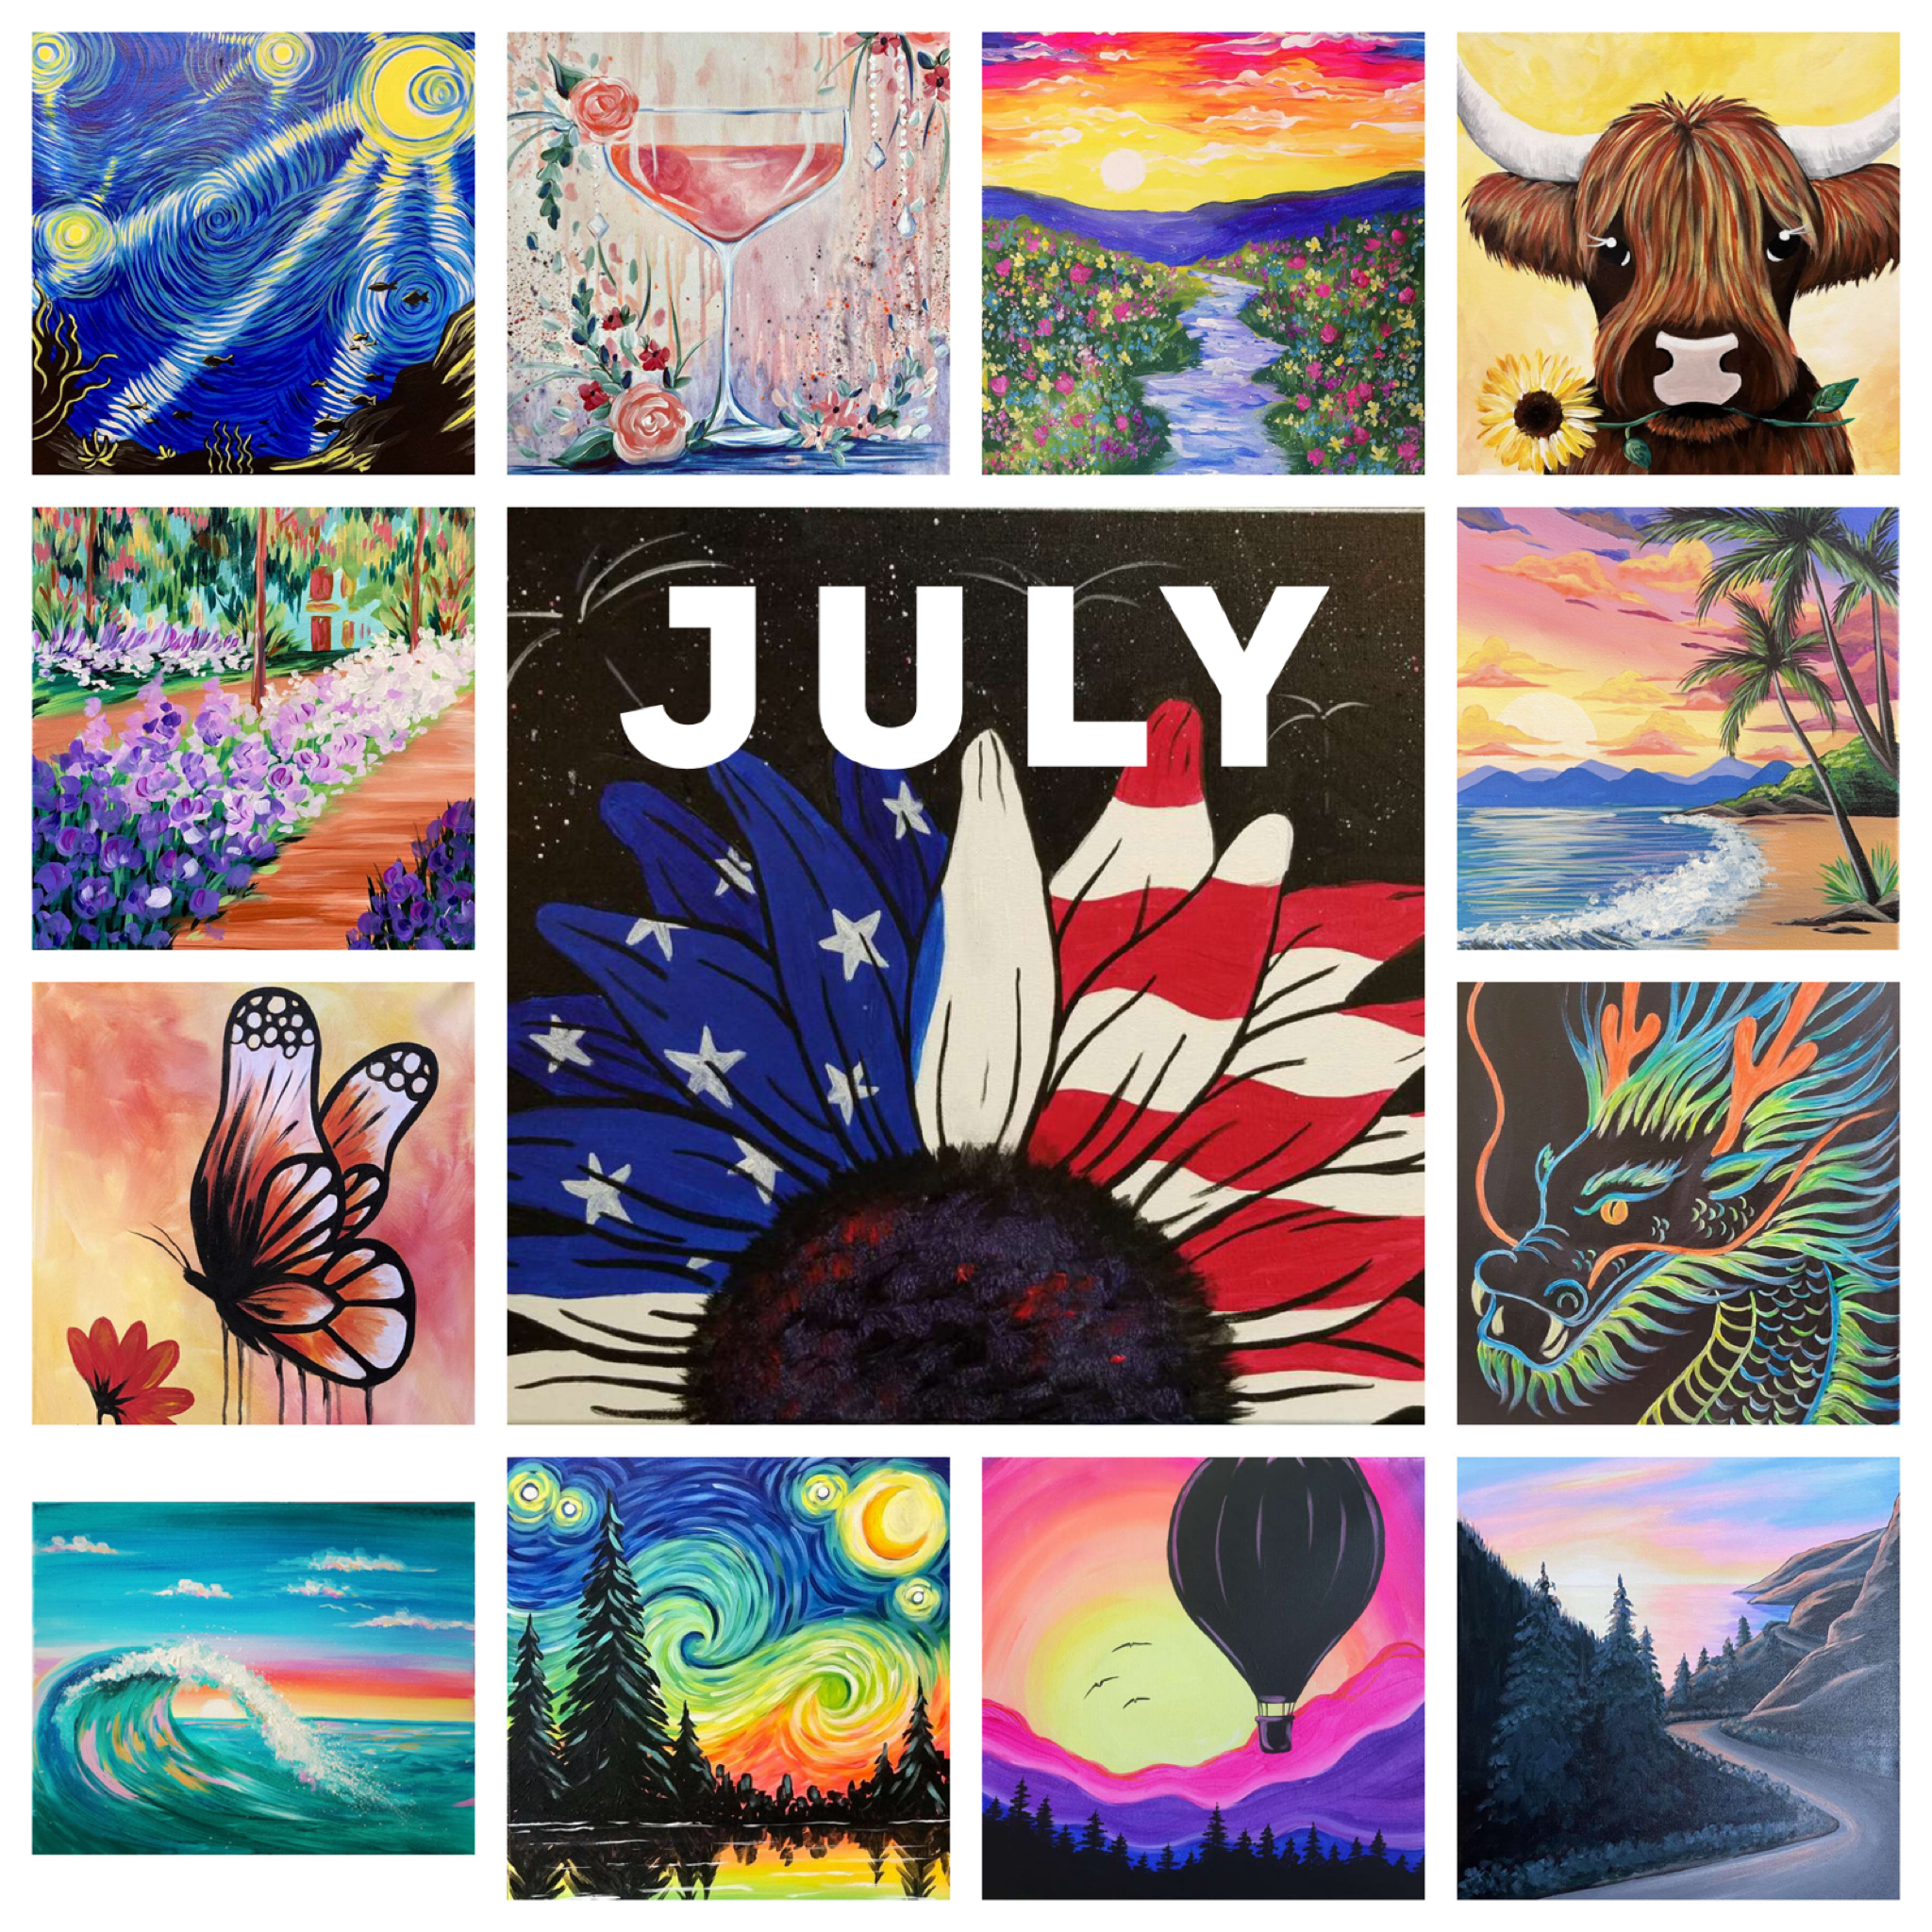 Dive into Summer Fun with July Paint and Sip Classes at Pinot’s Palette